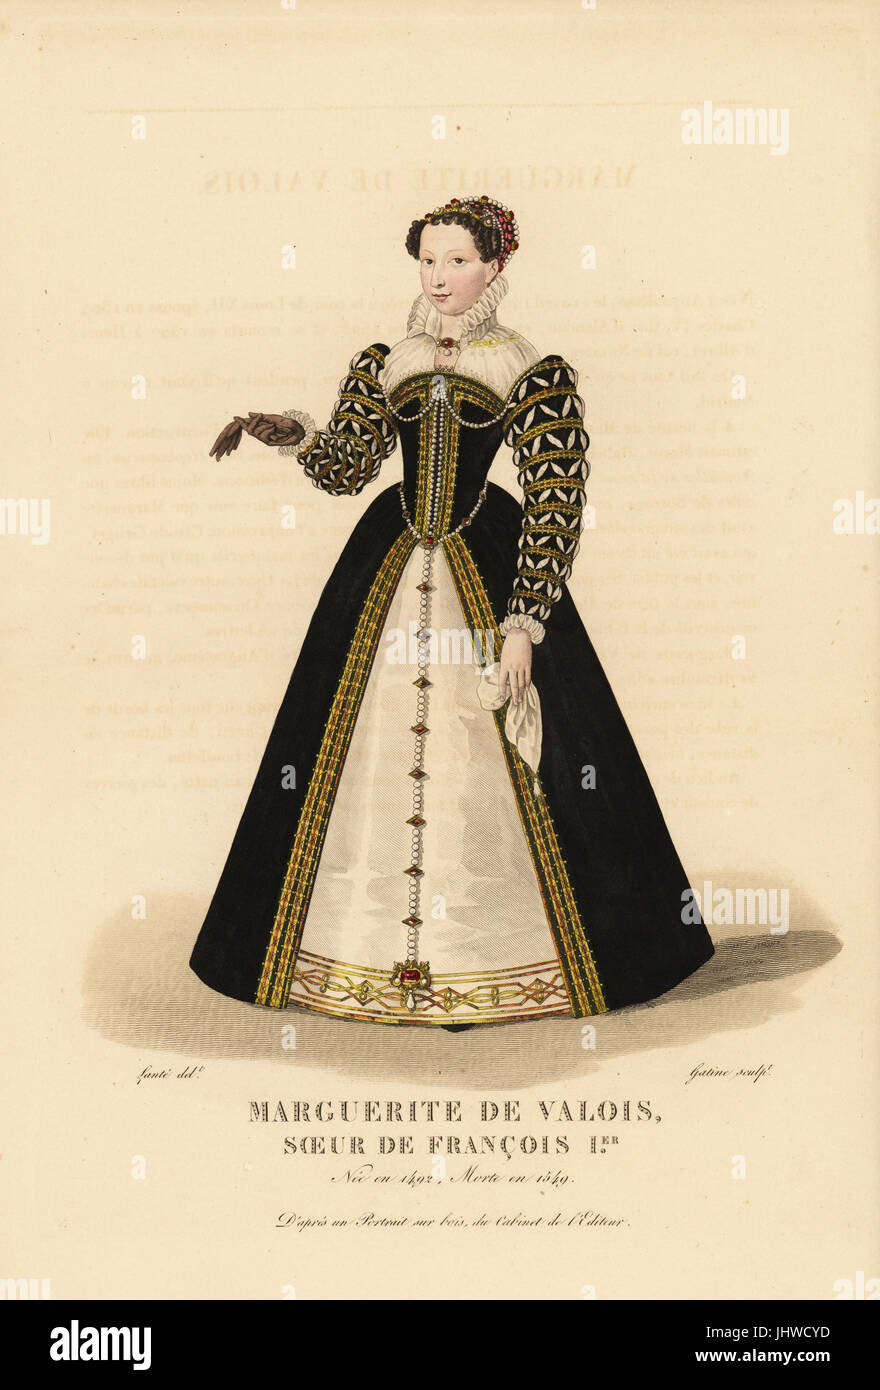 Marguerite de Navarre, sister of King Francis I, 1492-1549. (Titled Margurite de Valois in error.) She wears a cap of ribbons decorated with jewels and pearls, a dress with puffed and slashed sleeves, tight bodice, ruff collar, and front opening to reveal an embroidered petticoat. After a painting on wood in the editor's collection. Handcoloured copperplate engraving by Georges Jacques Gatine after an illustration by Louis Marie Lante from Galerie Francaise de Femmes Celebres, Paris, 1827. Stock Photo